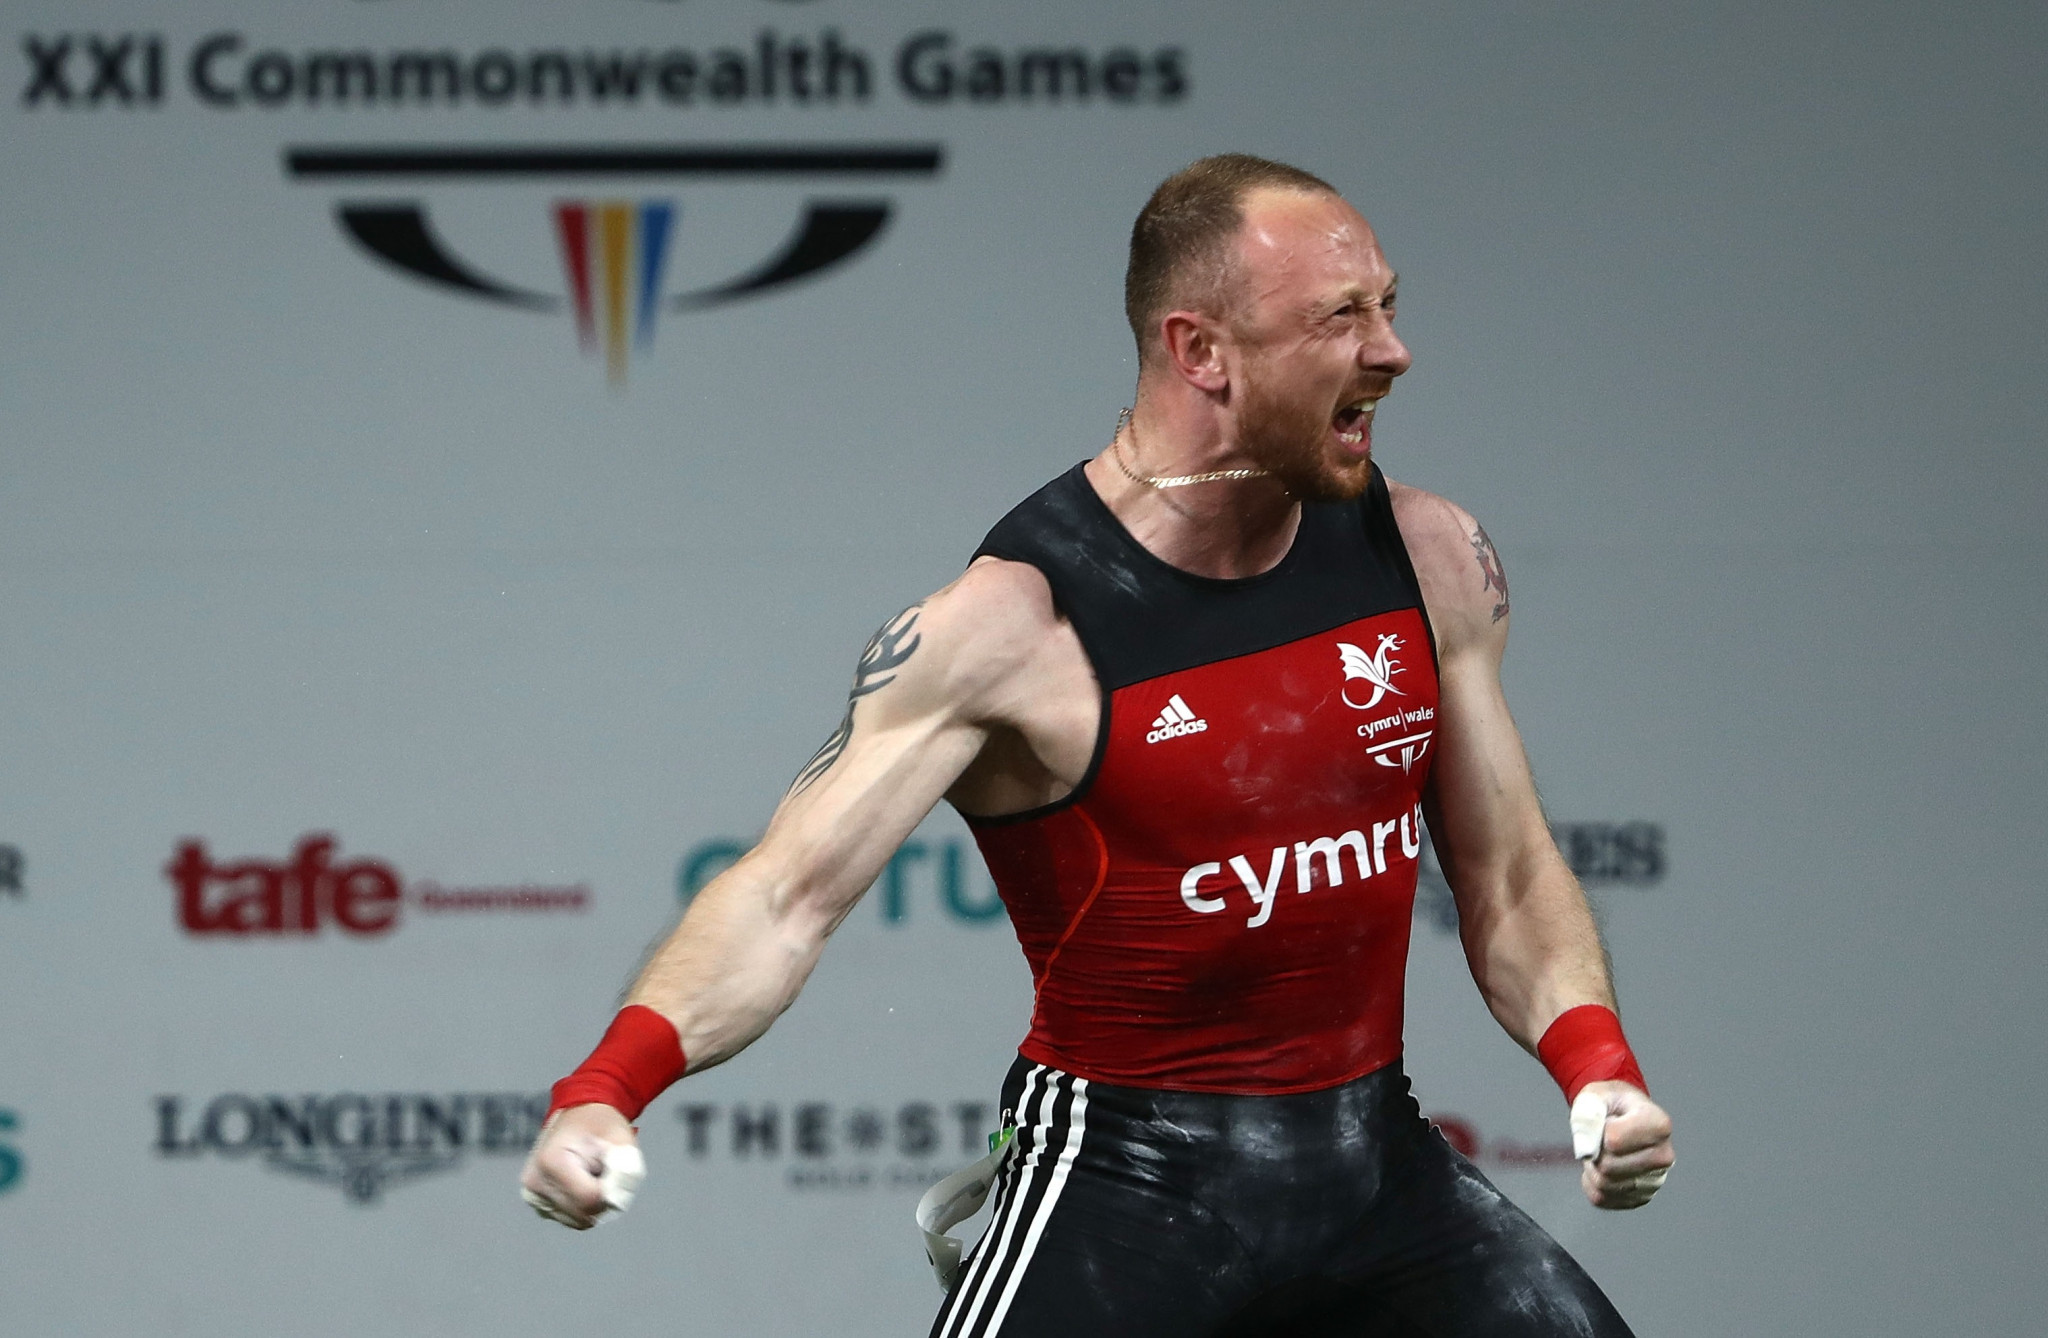 Gareth Evans opened Wales' gold medal tally after winning the men's 69kg event ©Getty Images